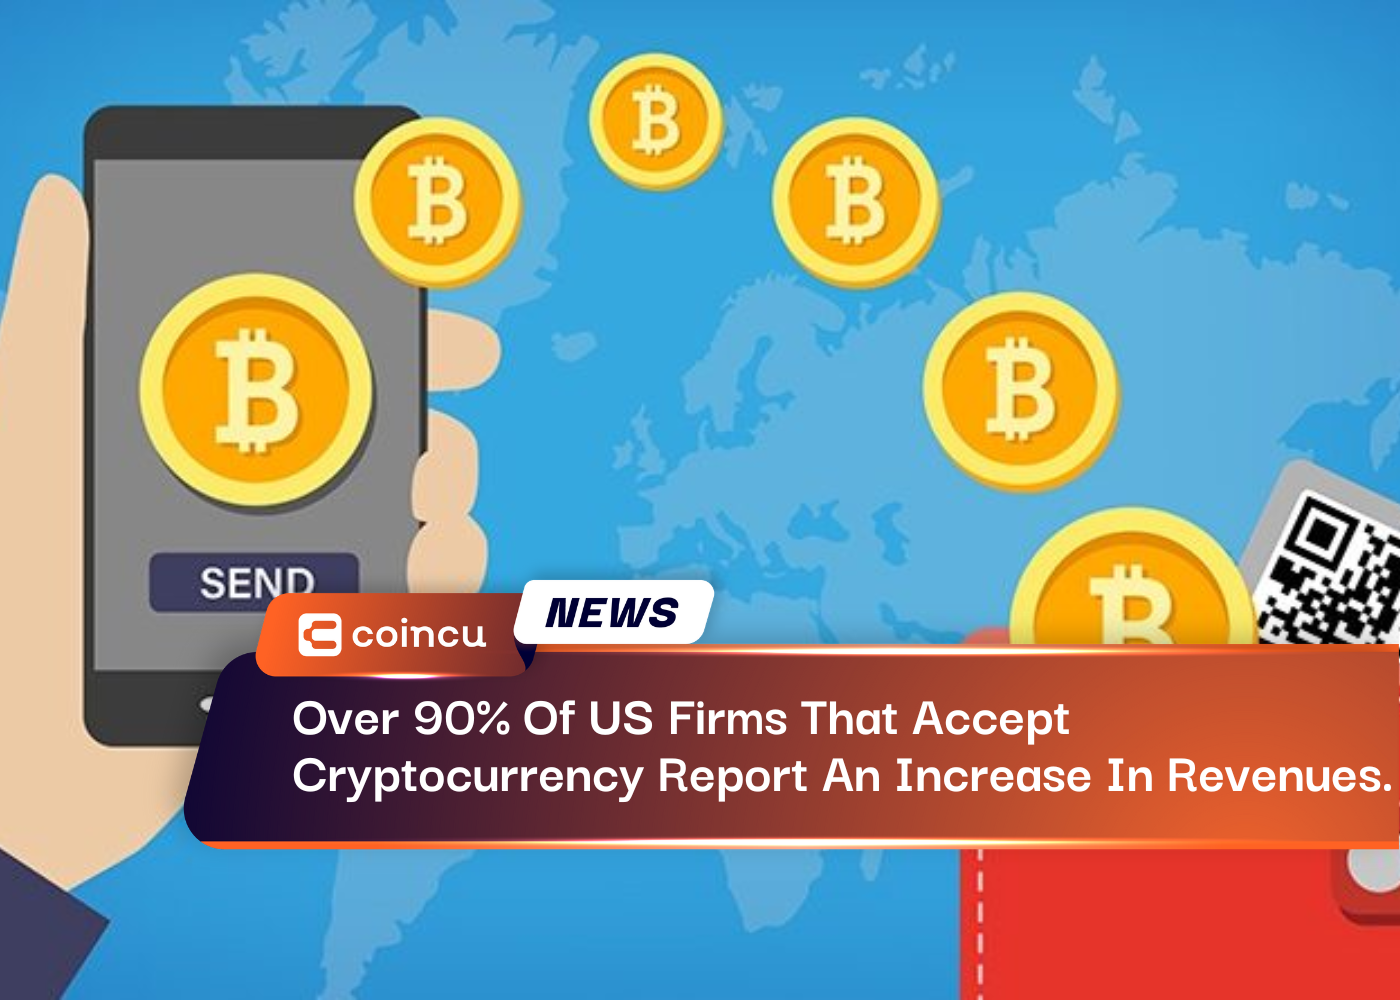 Over 90% Of US Firms That Accept Cryptocurrency Report An Increase In Revenues.